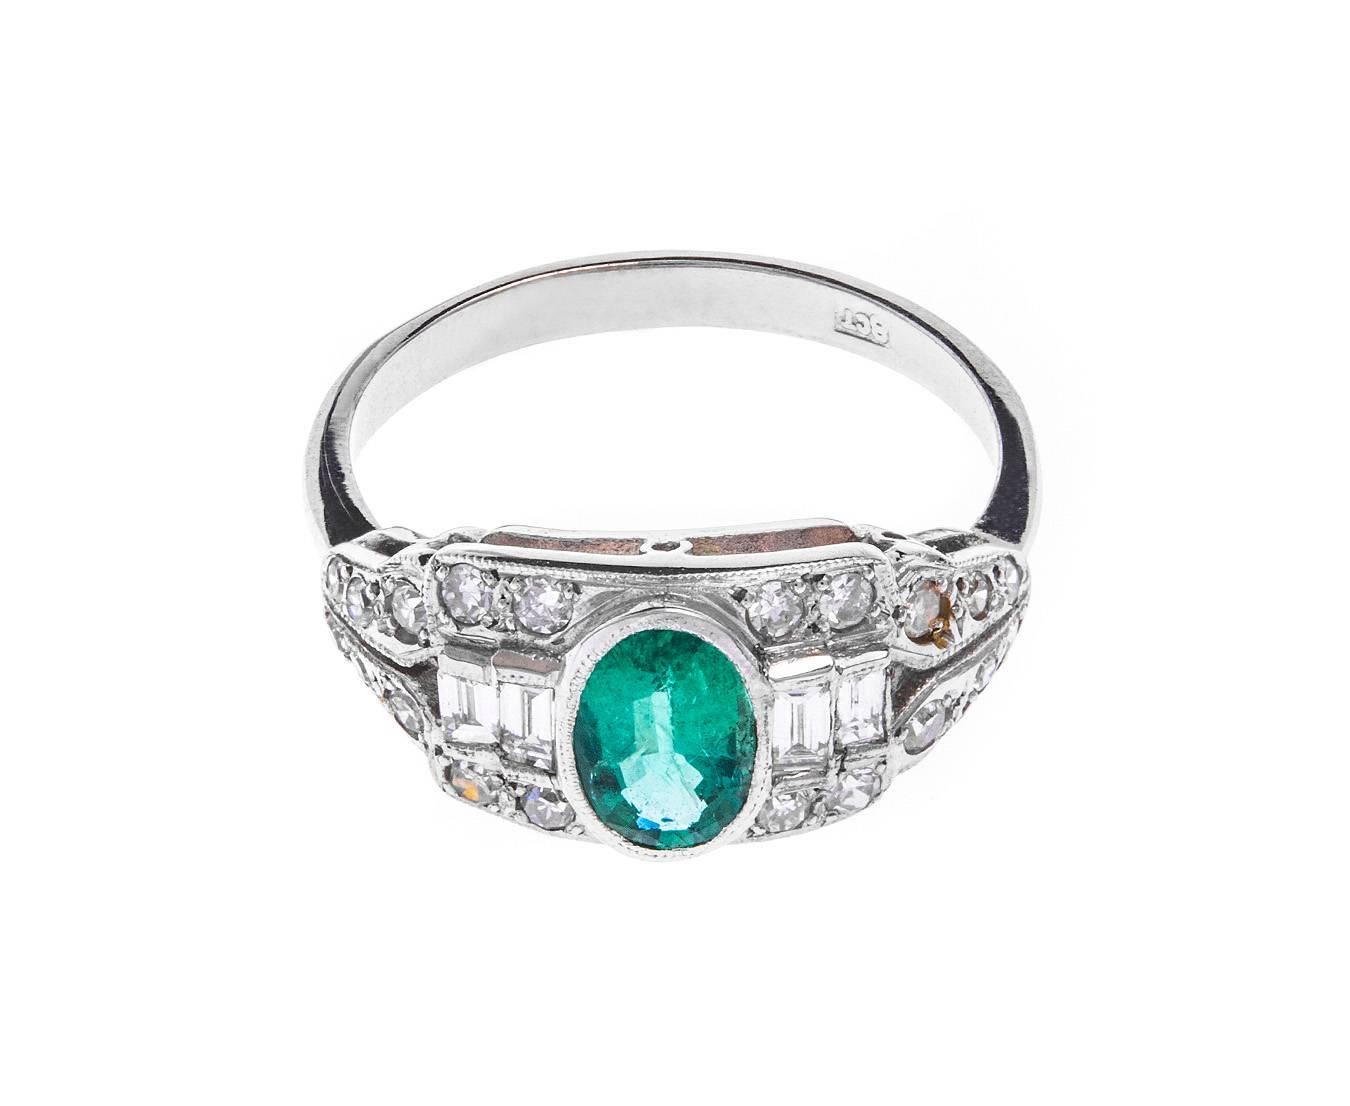 A fabulous Art Deco 18ct white gold cocktail ring, set with a deep green oval emerald amongst eight and baguette cut diamonds (estimated total 0.52ct)  in glorious geometric styles. Open gallery sides and a tapered band keep the piece light and